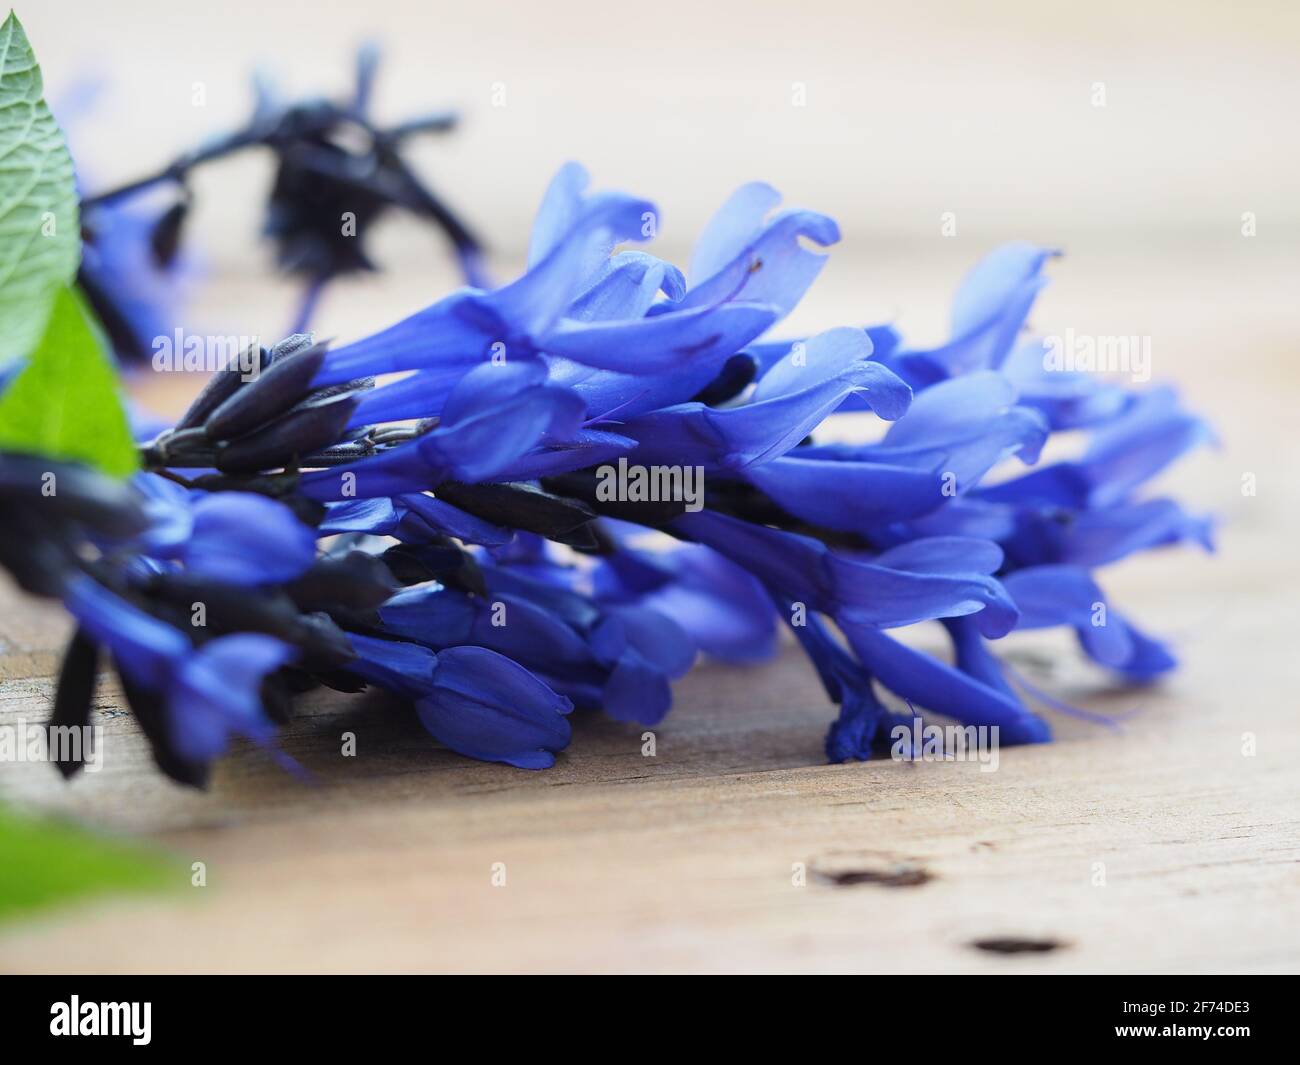 Salvia Guaranitica, or anise-scented sage, with it's Royal Blue or indigo purple Flowers,  Black Calyx and black stalks Stock Photo